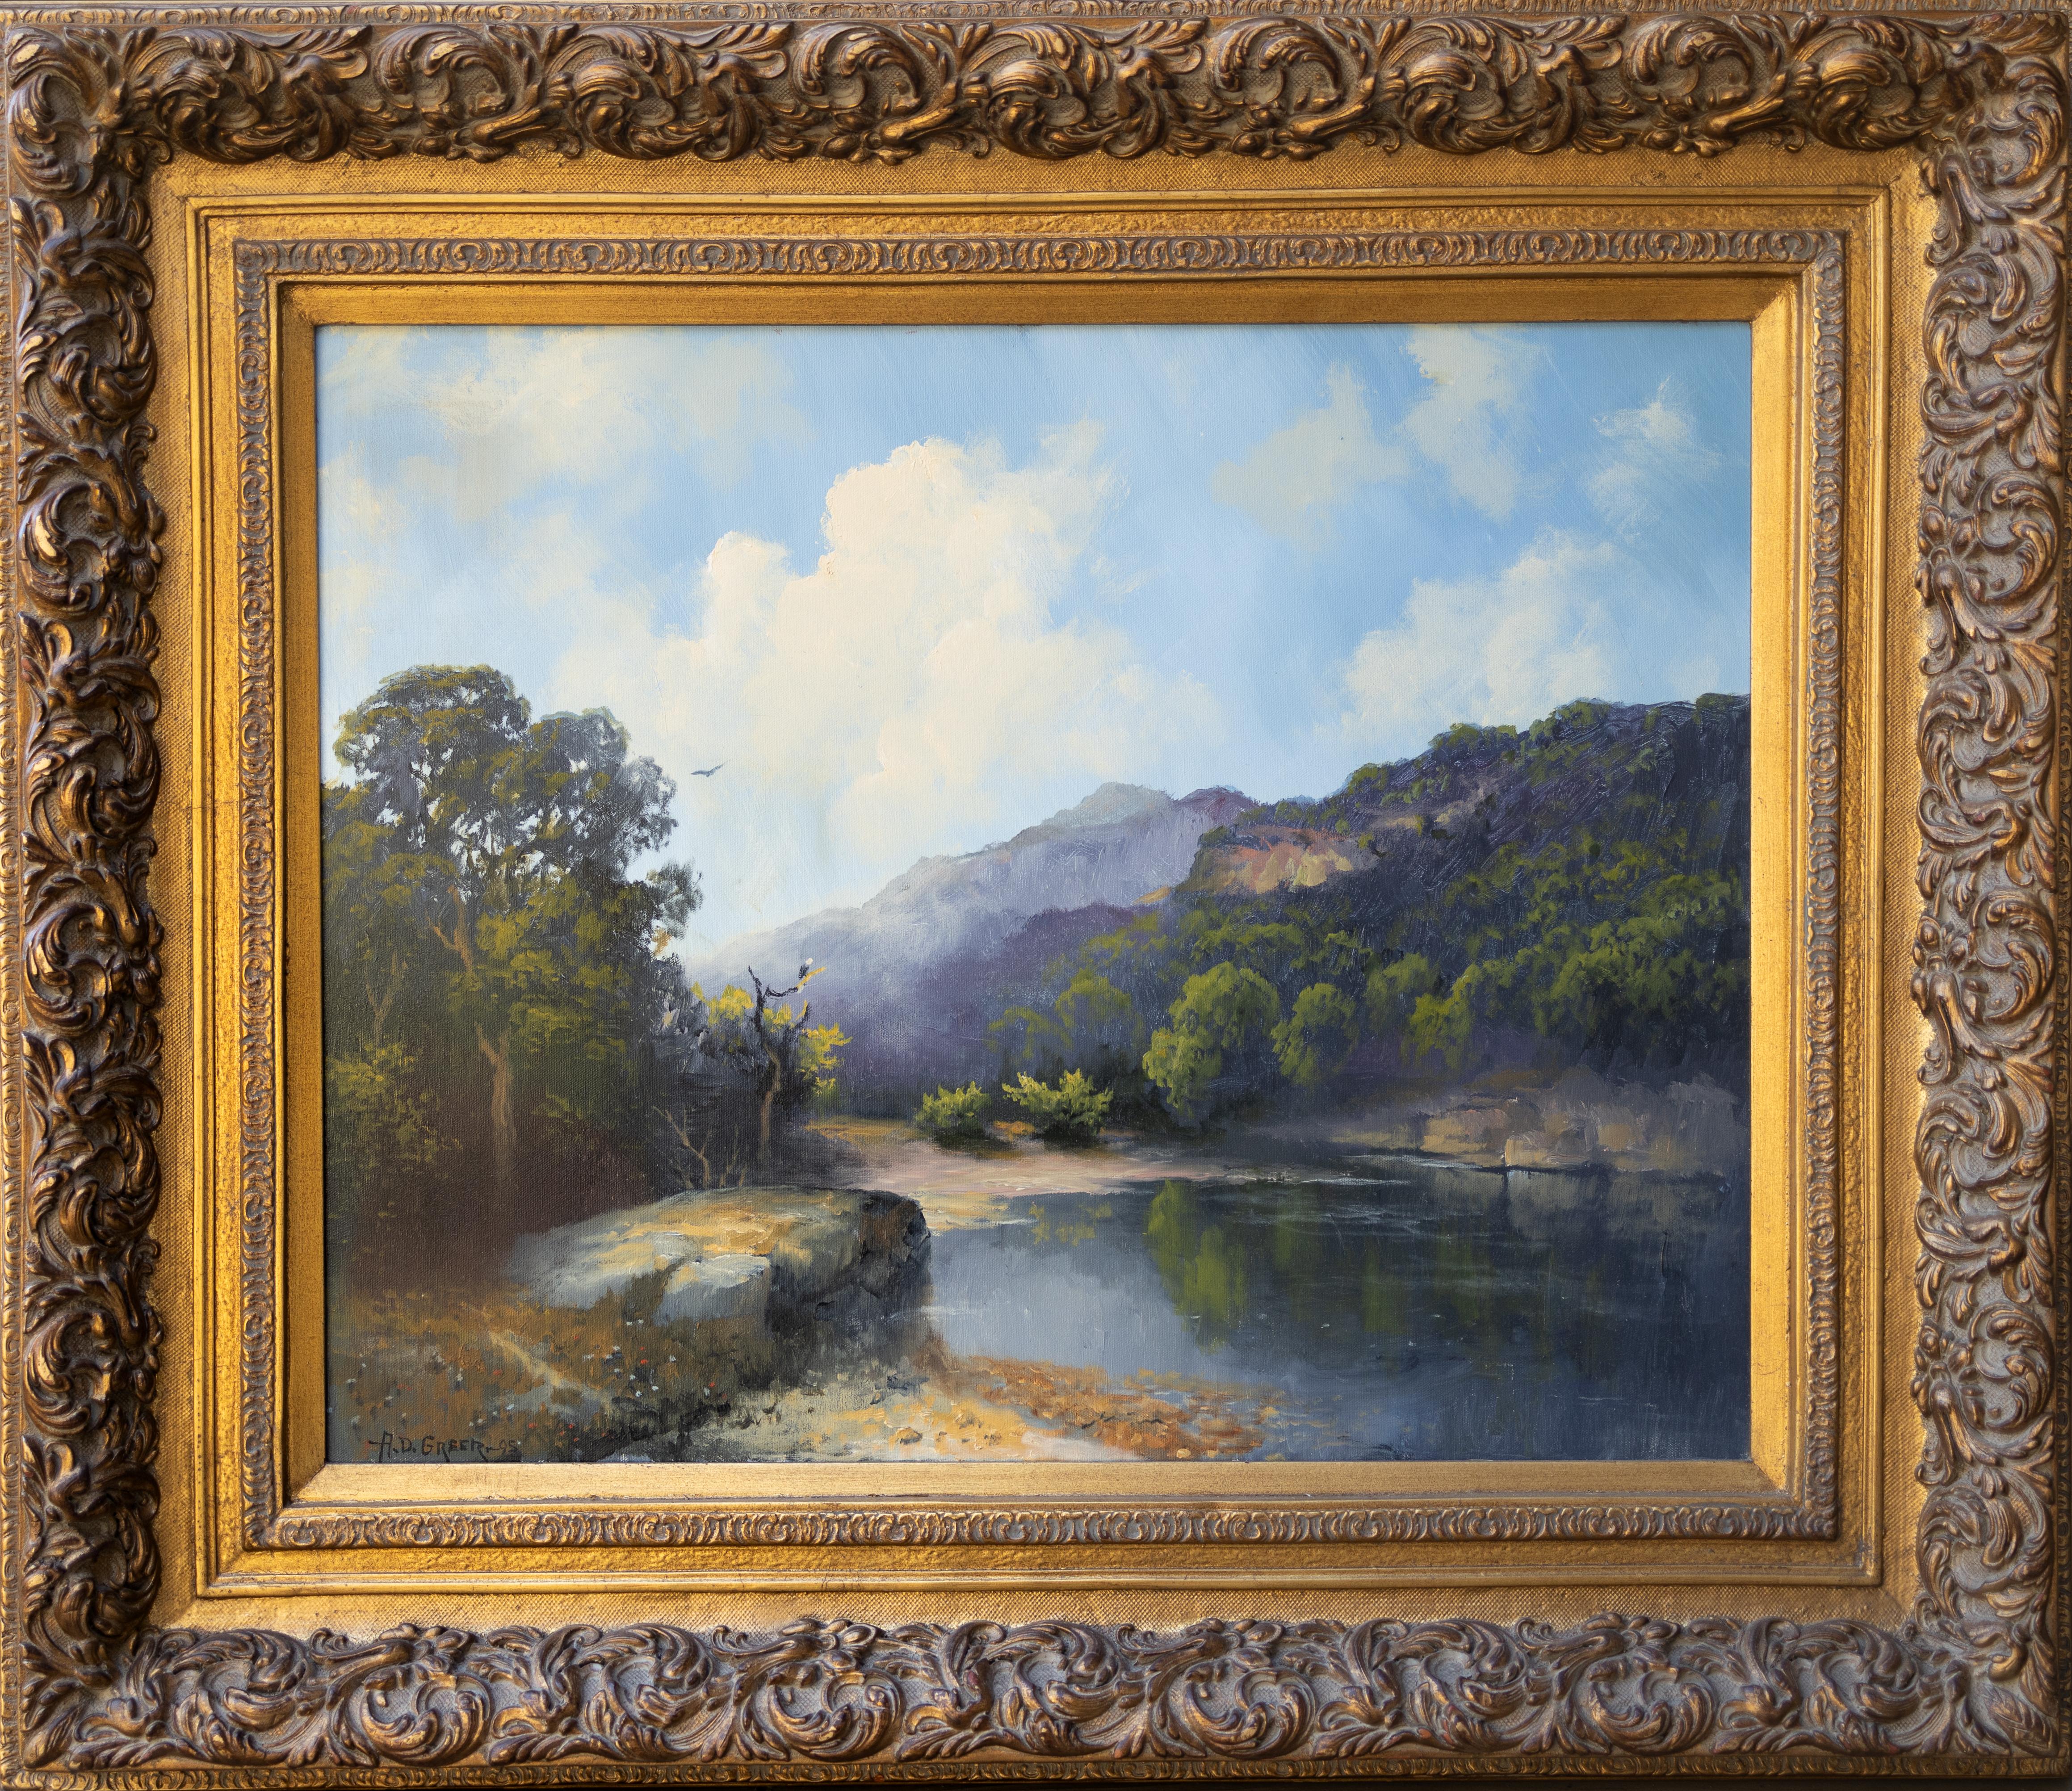 Mountain Landscape with Pond - Painting by A.D. Greer